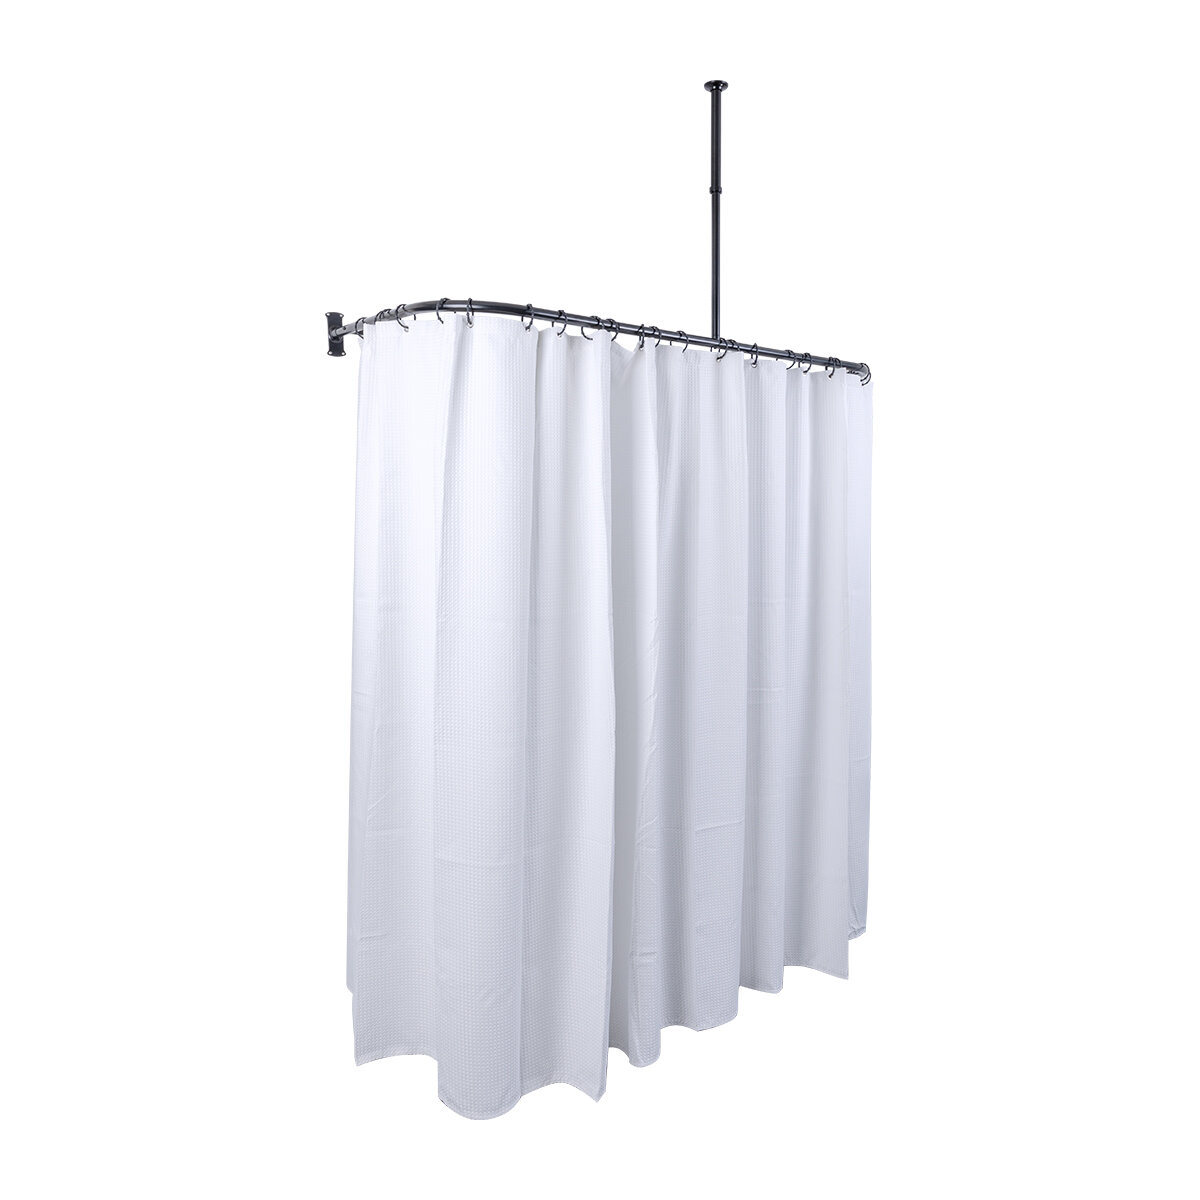 Utopia Alley Oval Shape Shower Curtain Rings for Bathroom